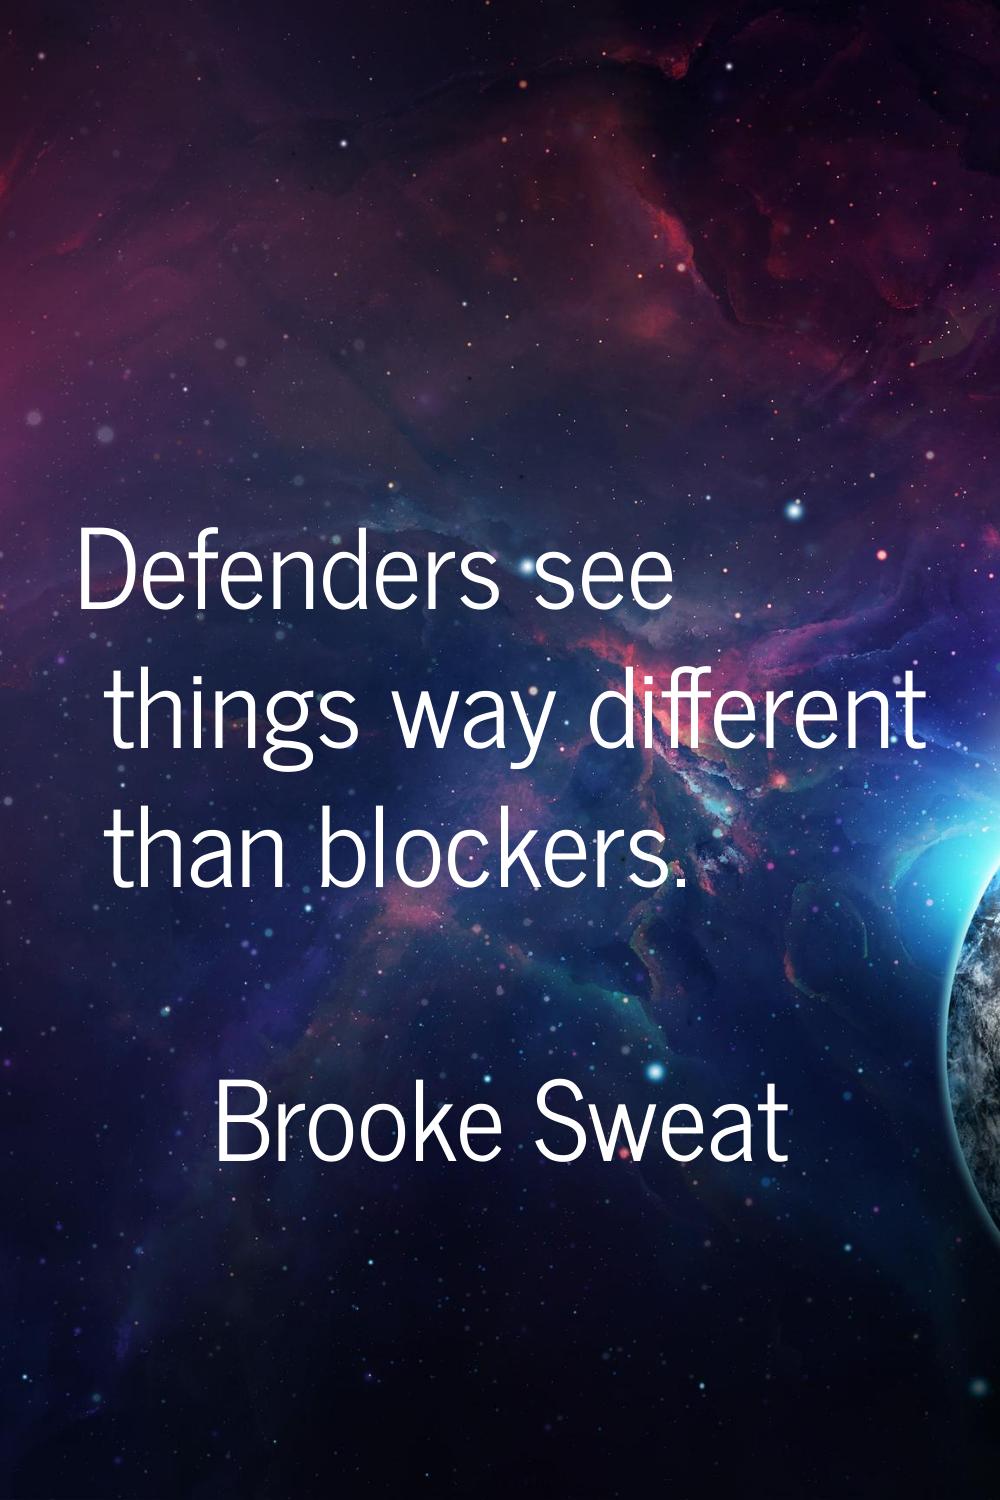 Defenders see things way different than blockers.